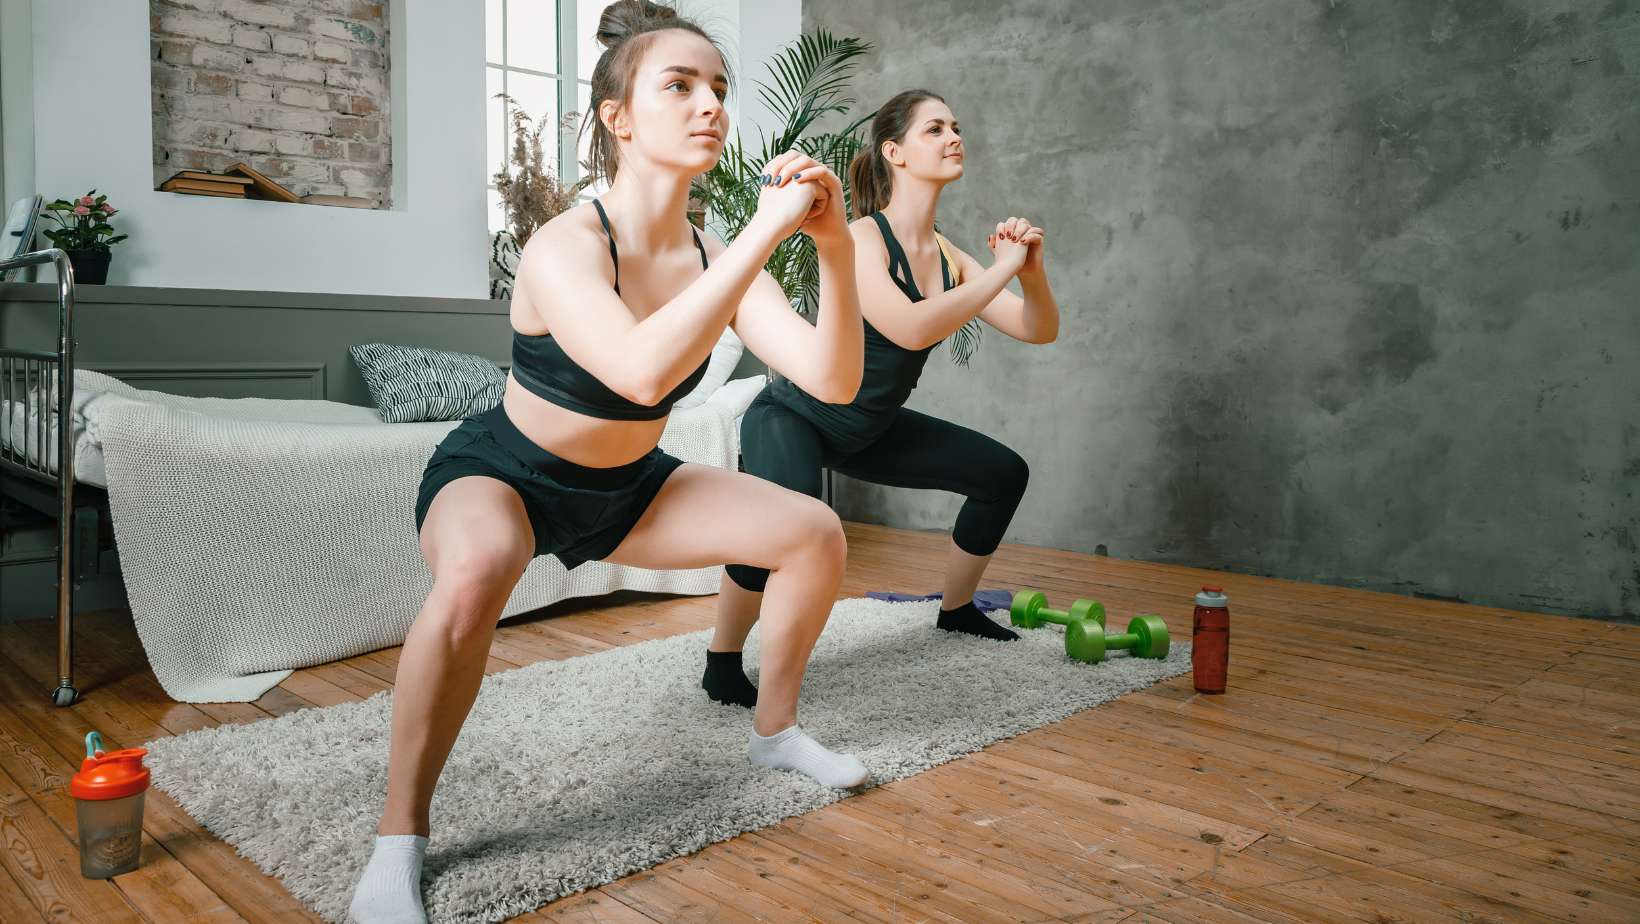 Young women go in for a squat workout at home